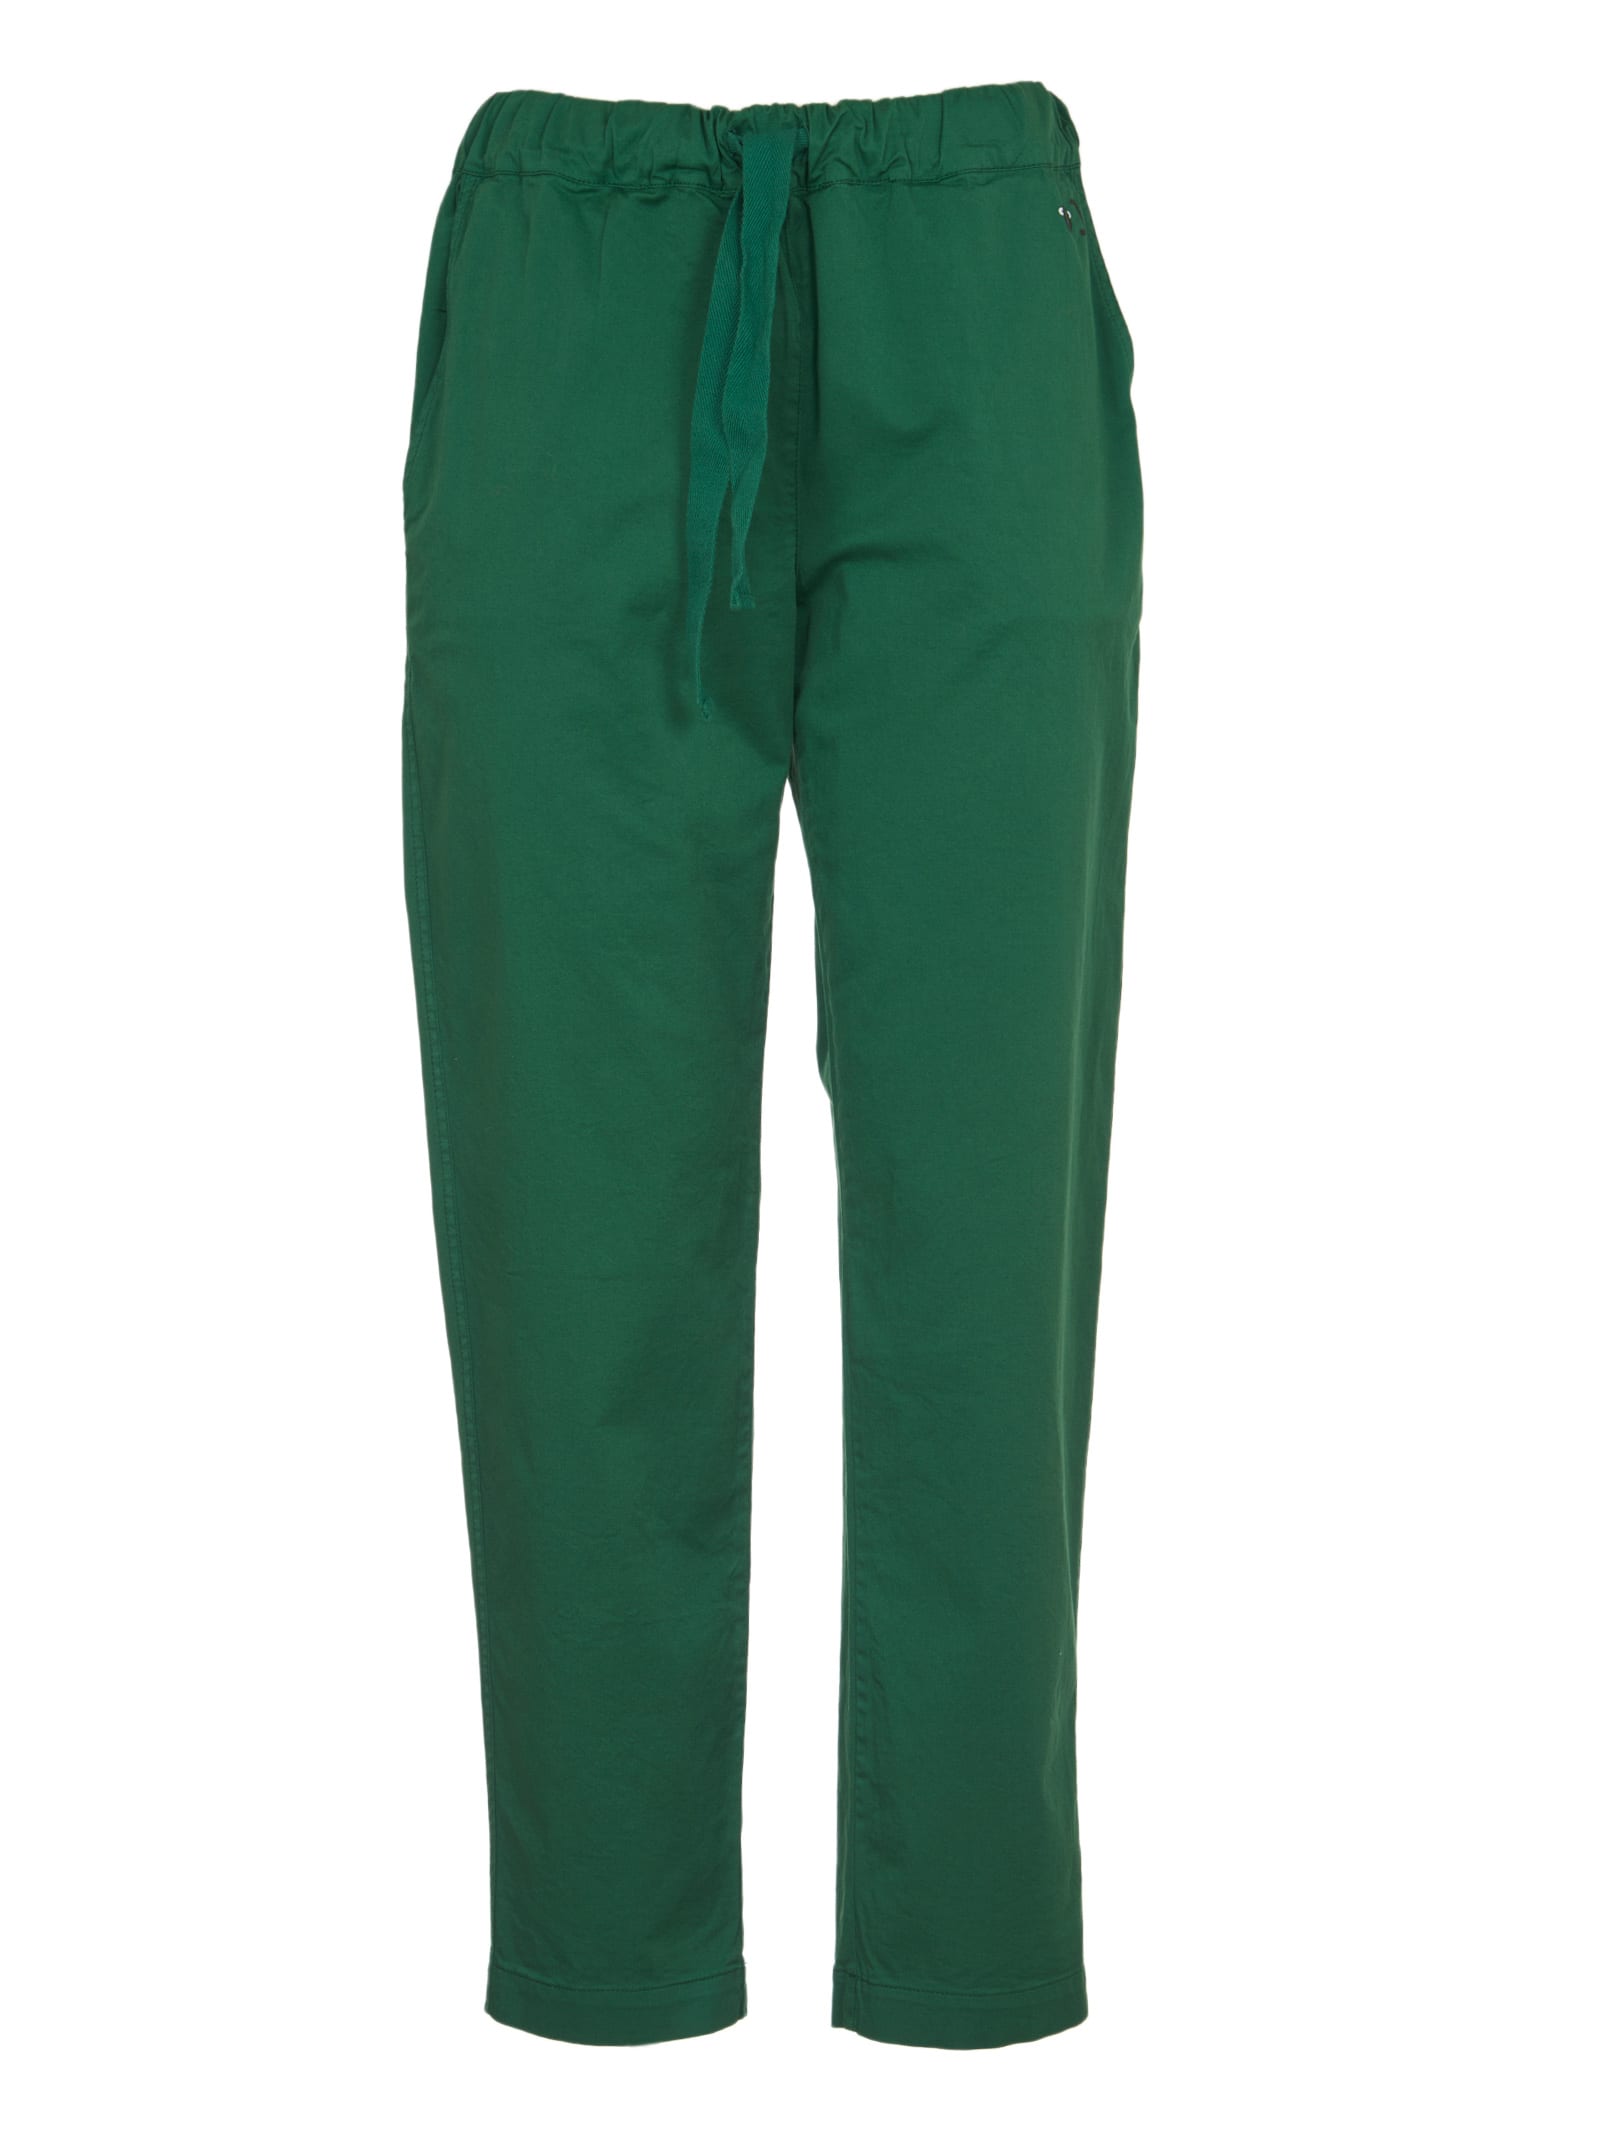 SEMICOUTURE Green Cotton Trousers